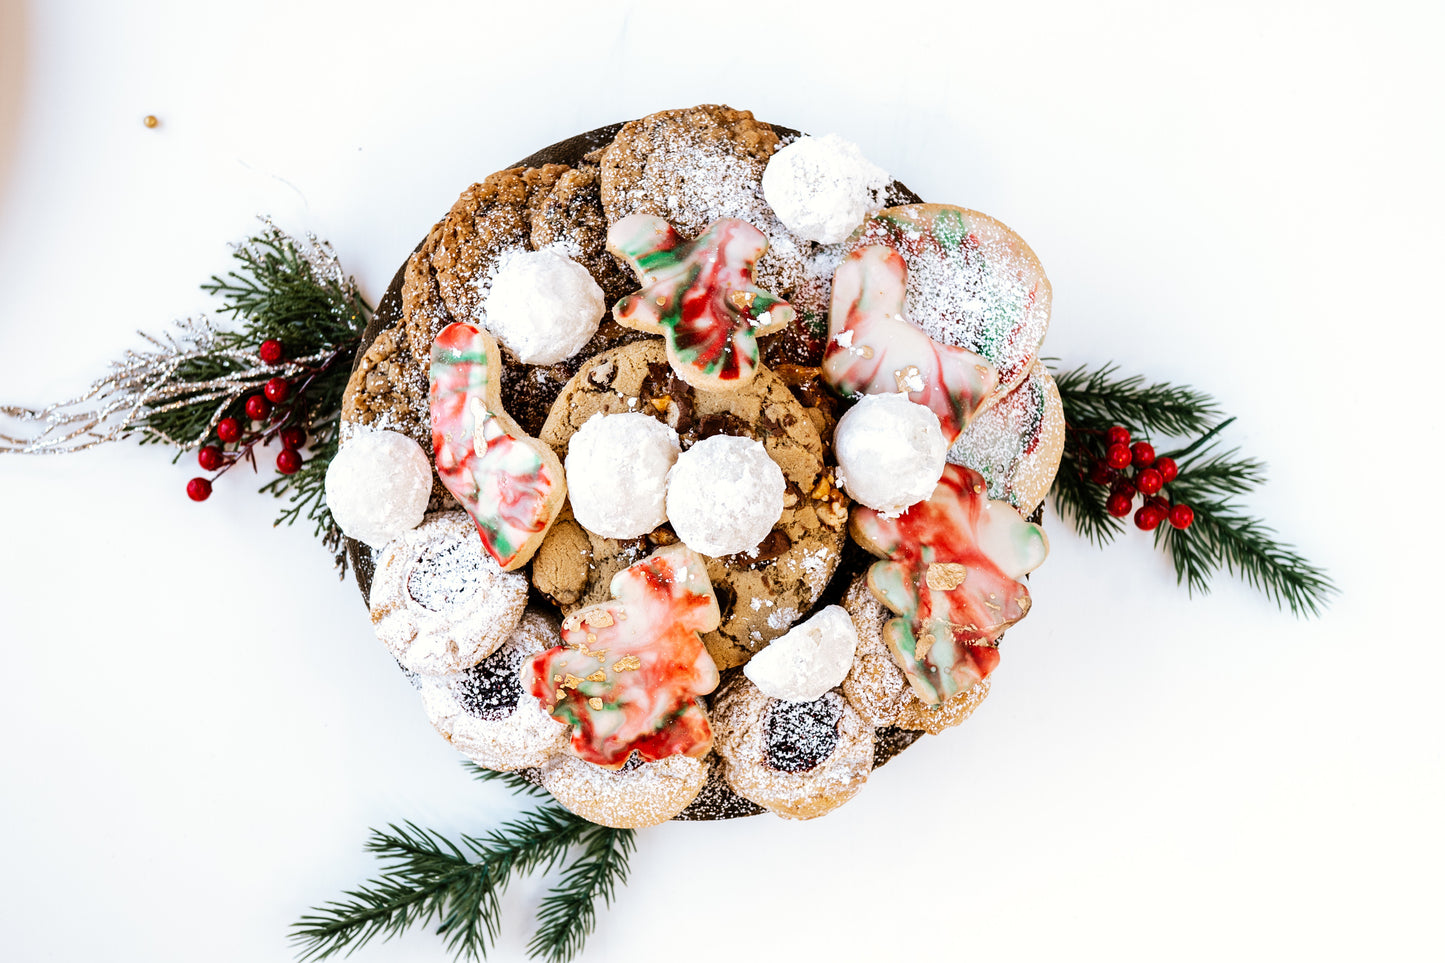 Our holiday cookie platter